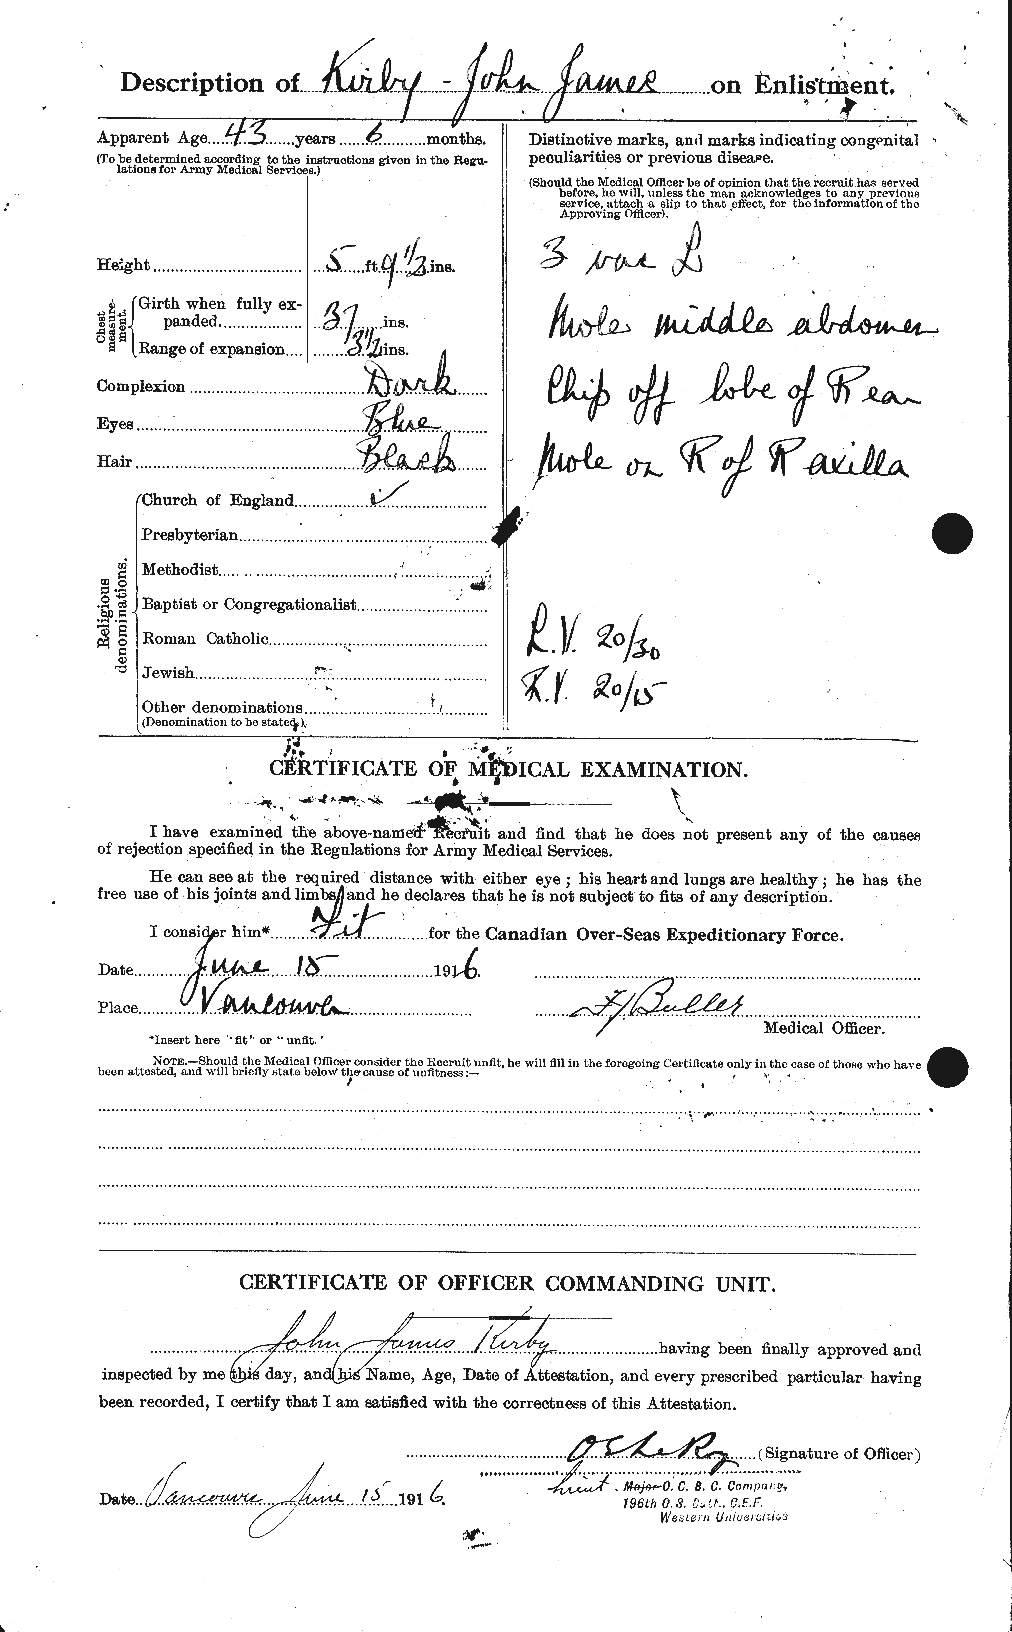 Personnel Records of the First World War - CEF 437234b